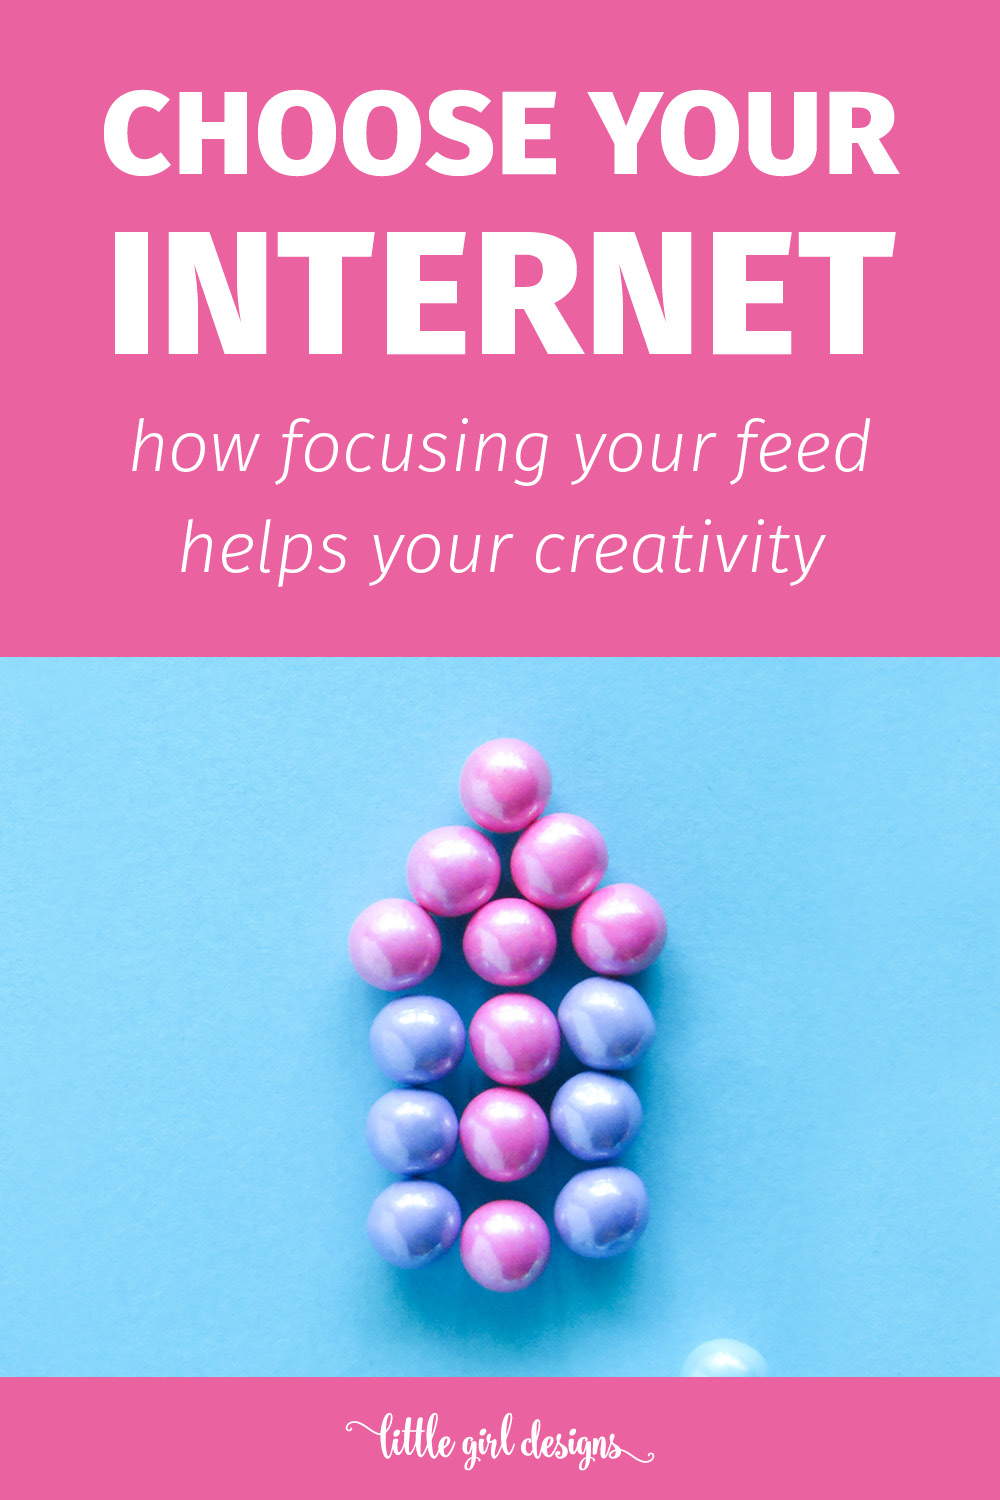 Choose Your Internet - How focusing your social media feeds will help you find more joy, contentment, and creativity in your life. For reals! via littlegirldesigns.com